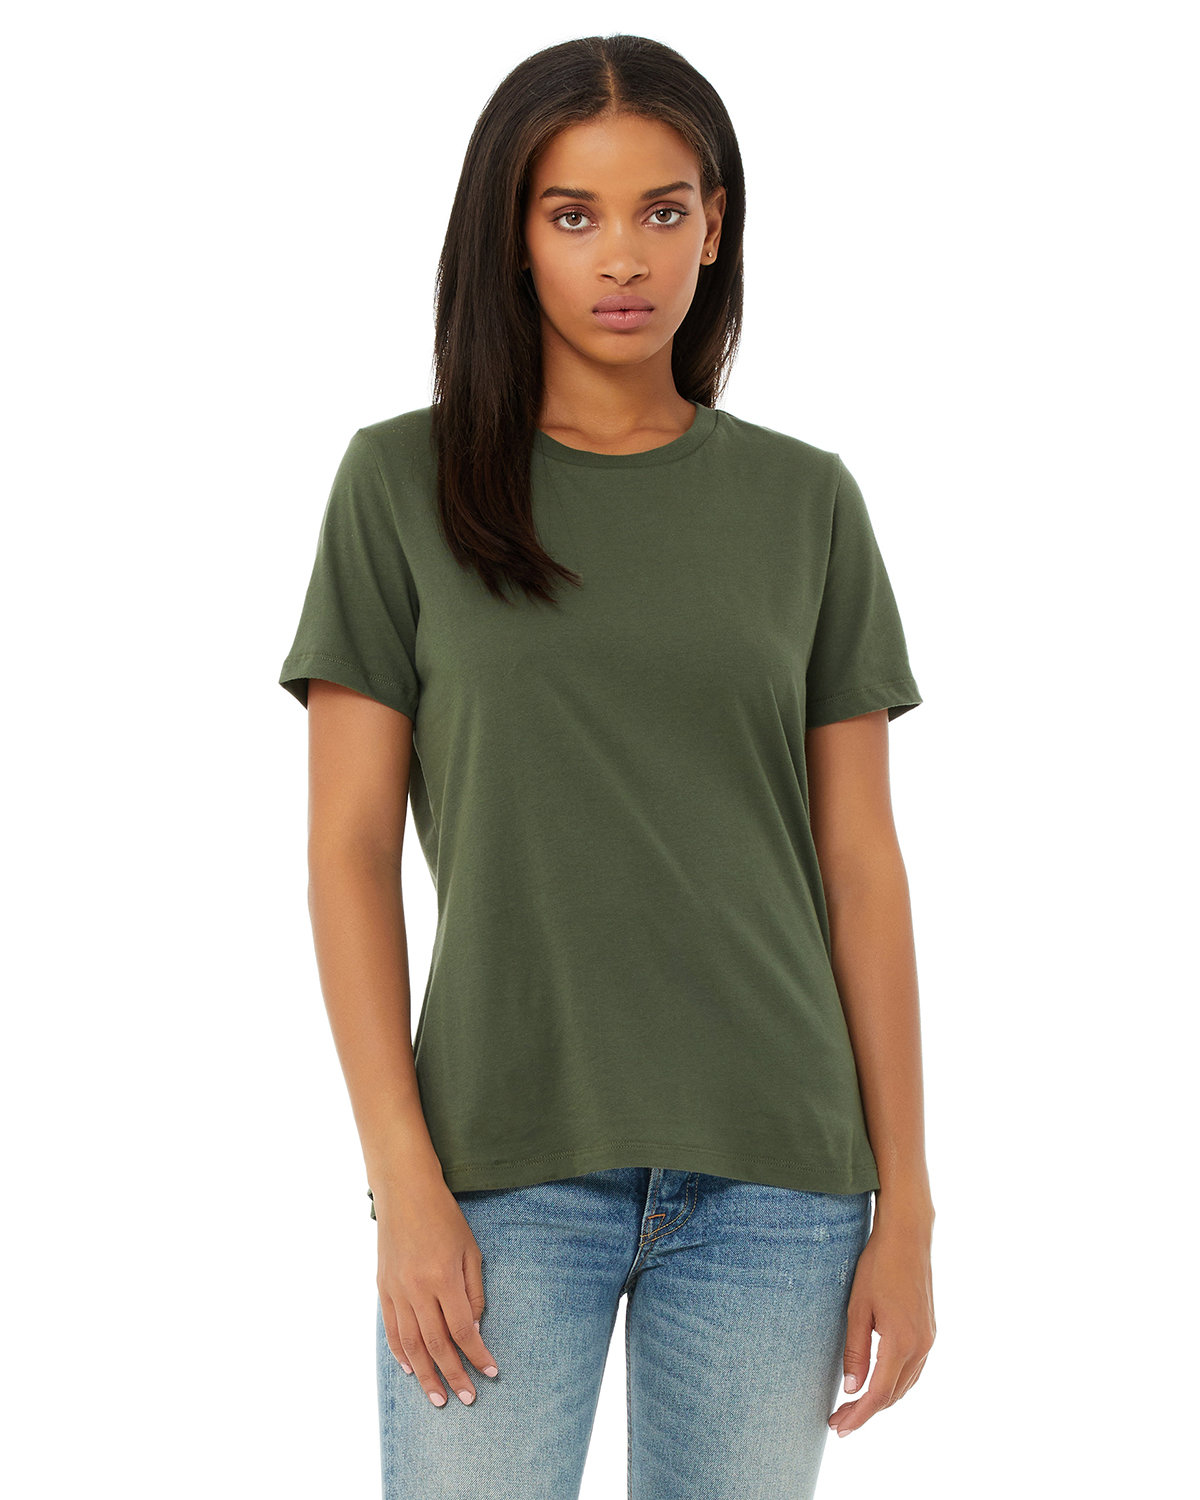 click to view MILITARY GREEN